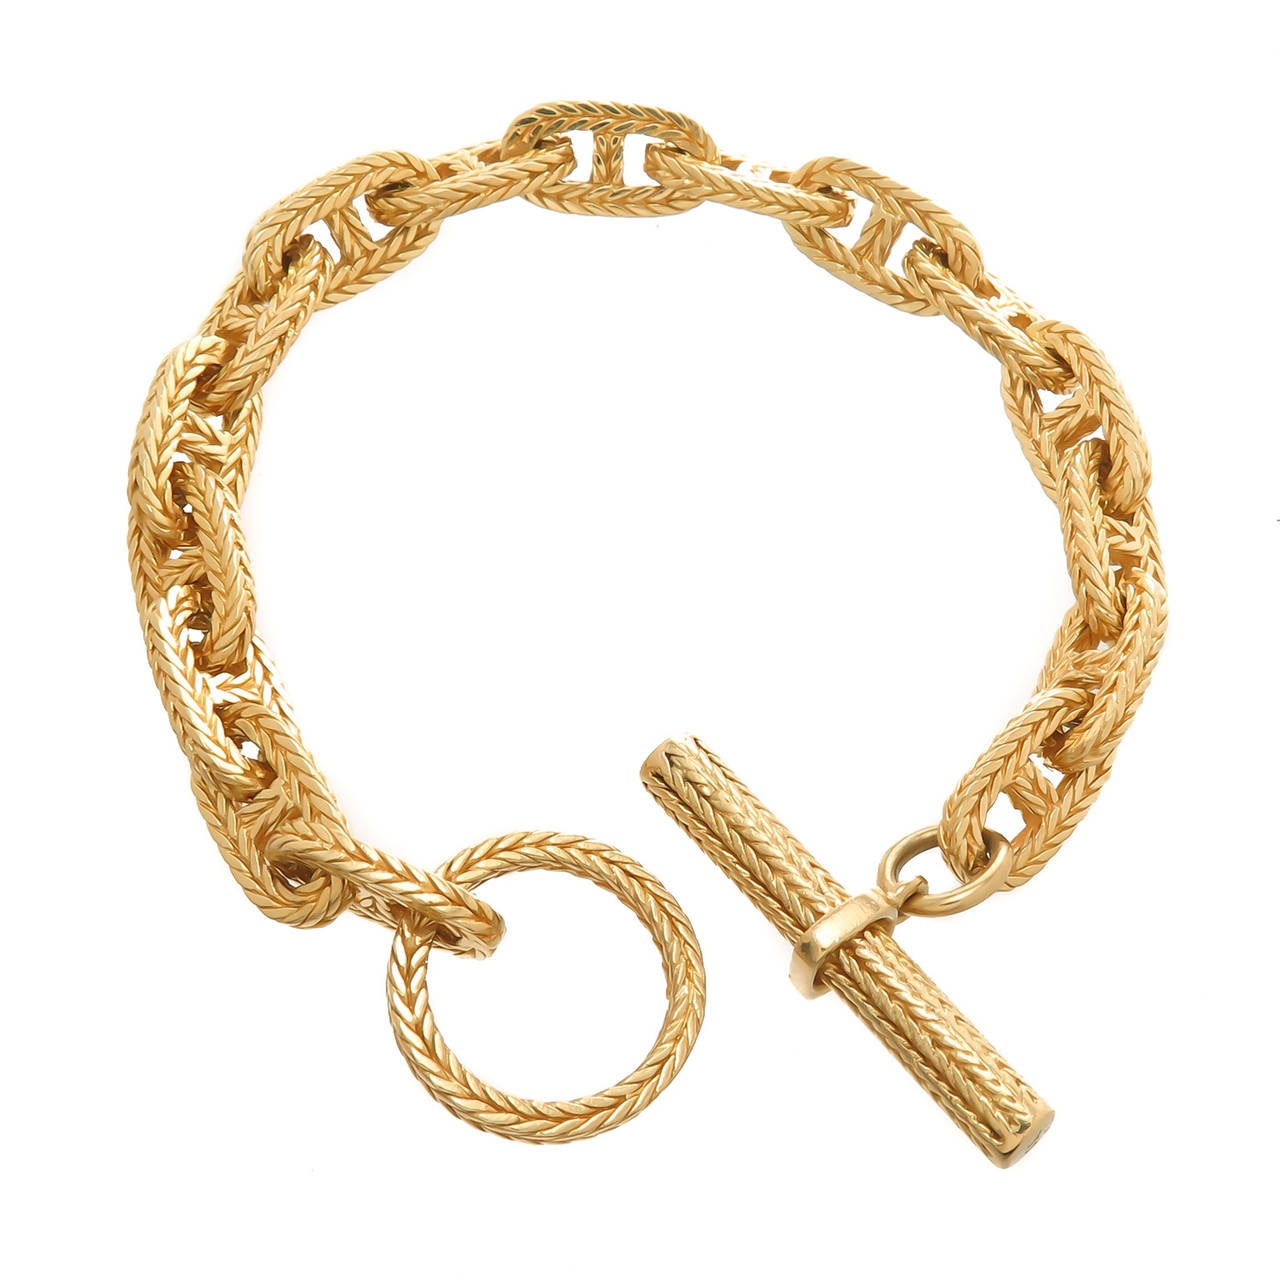 Hermes 18K yellow Gold Chaine D'Ancre Tresse Toggle Bracelet, Solid Links with a Toggle closure. Measuring 8 1/4 inch in Length and just under 3/8 inch wide.